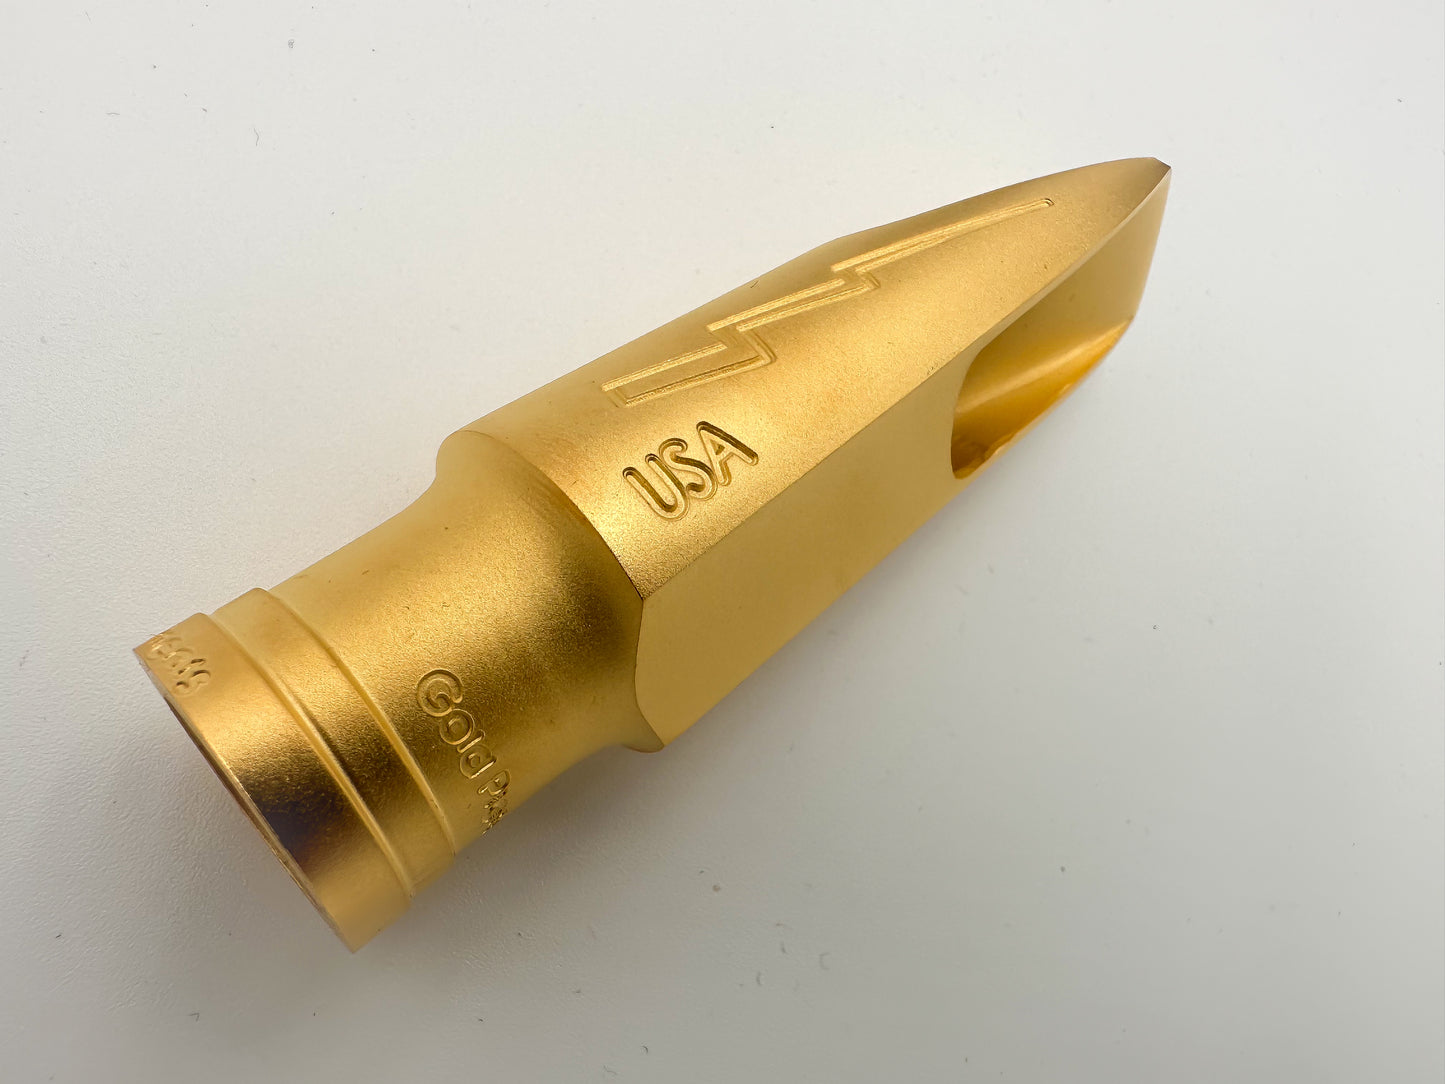 Thunder Gold Plated Tenor Saxophone Mouthpiece